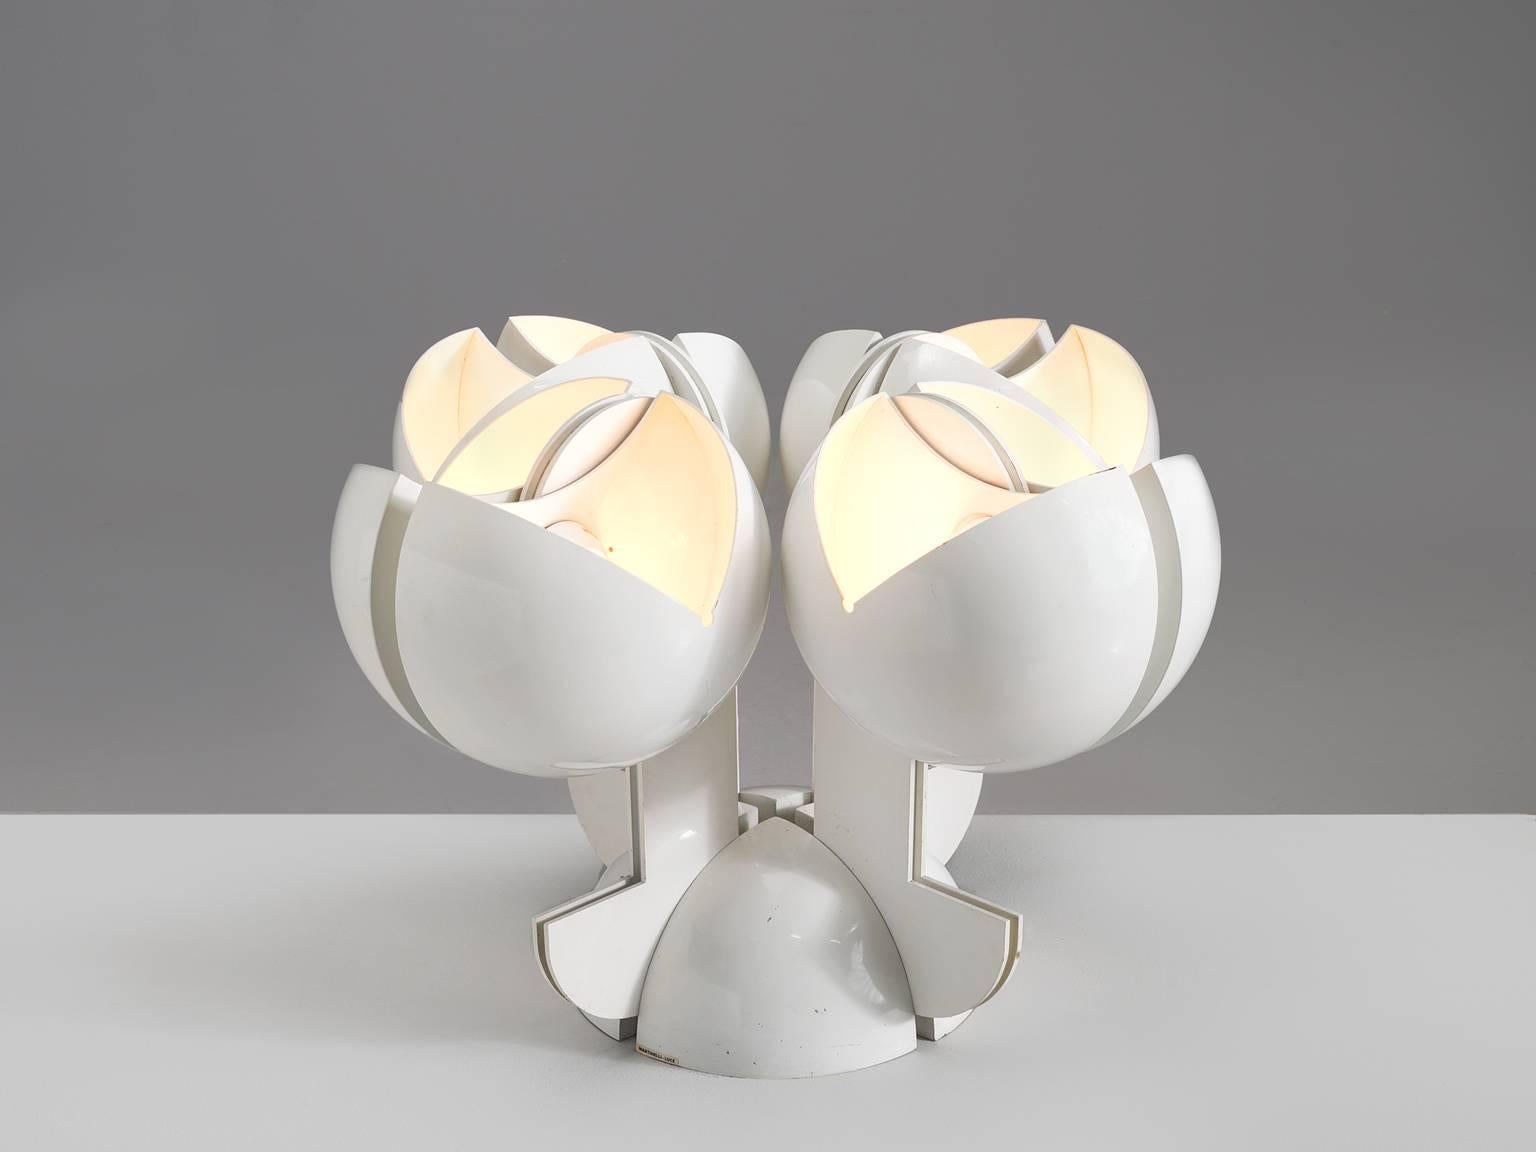 Gae Aulenti for Martinelli Luce, La Ruspa table lamp in metal by Italy, 1968.

Futuristic floor lamp in white coated metal by Italian designer Gae Aulenti. Extremely rare model with four lights. The 'La Ruspa' series of lights by Aulenti is